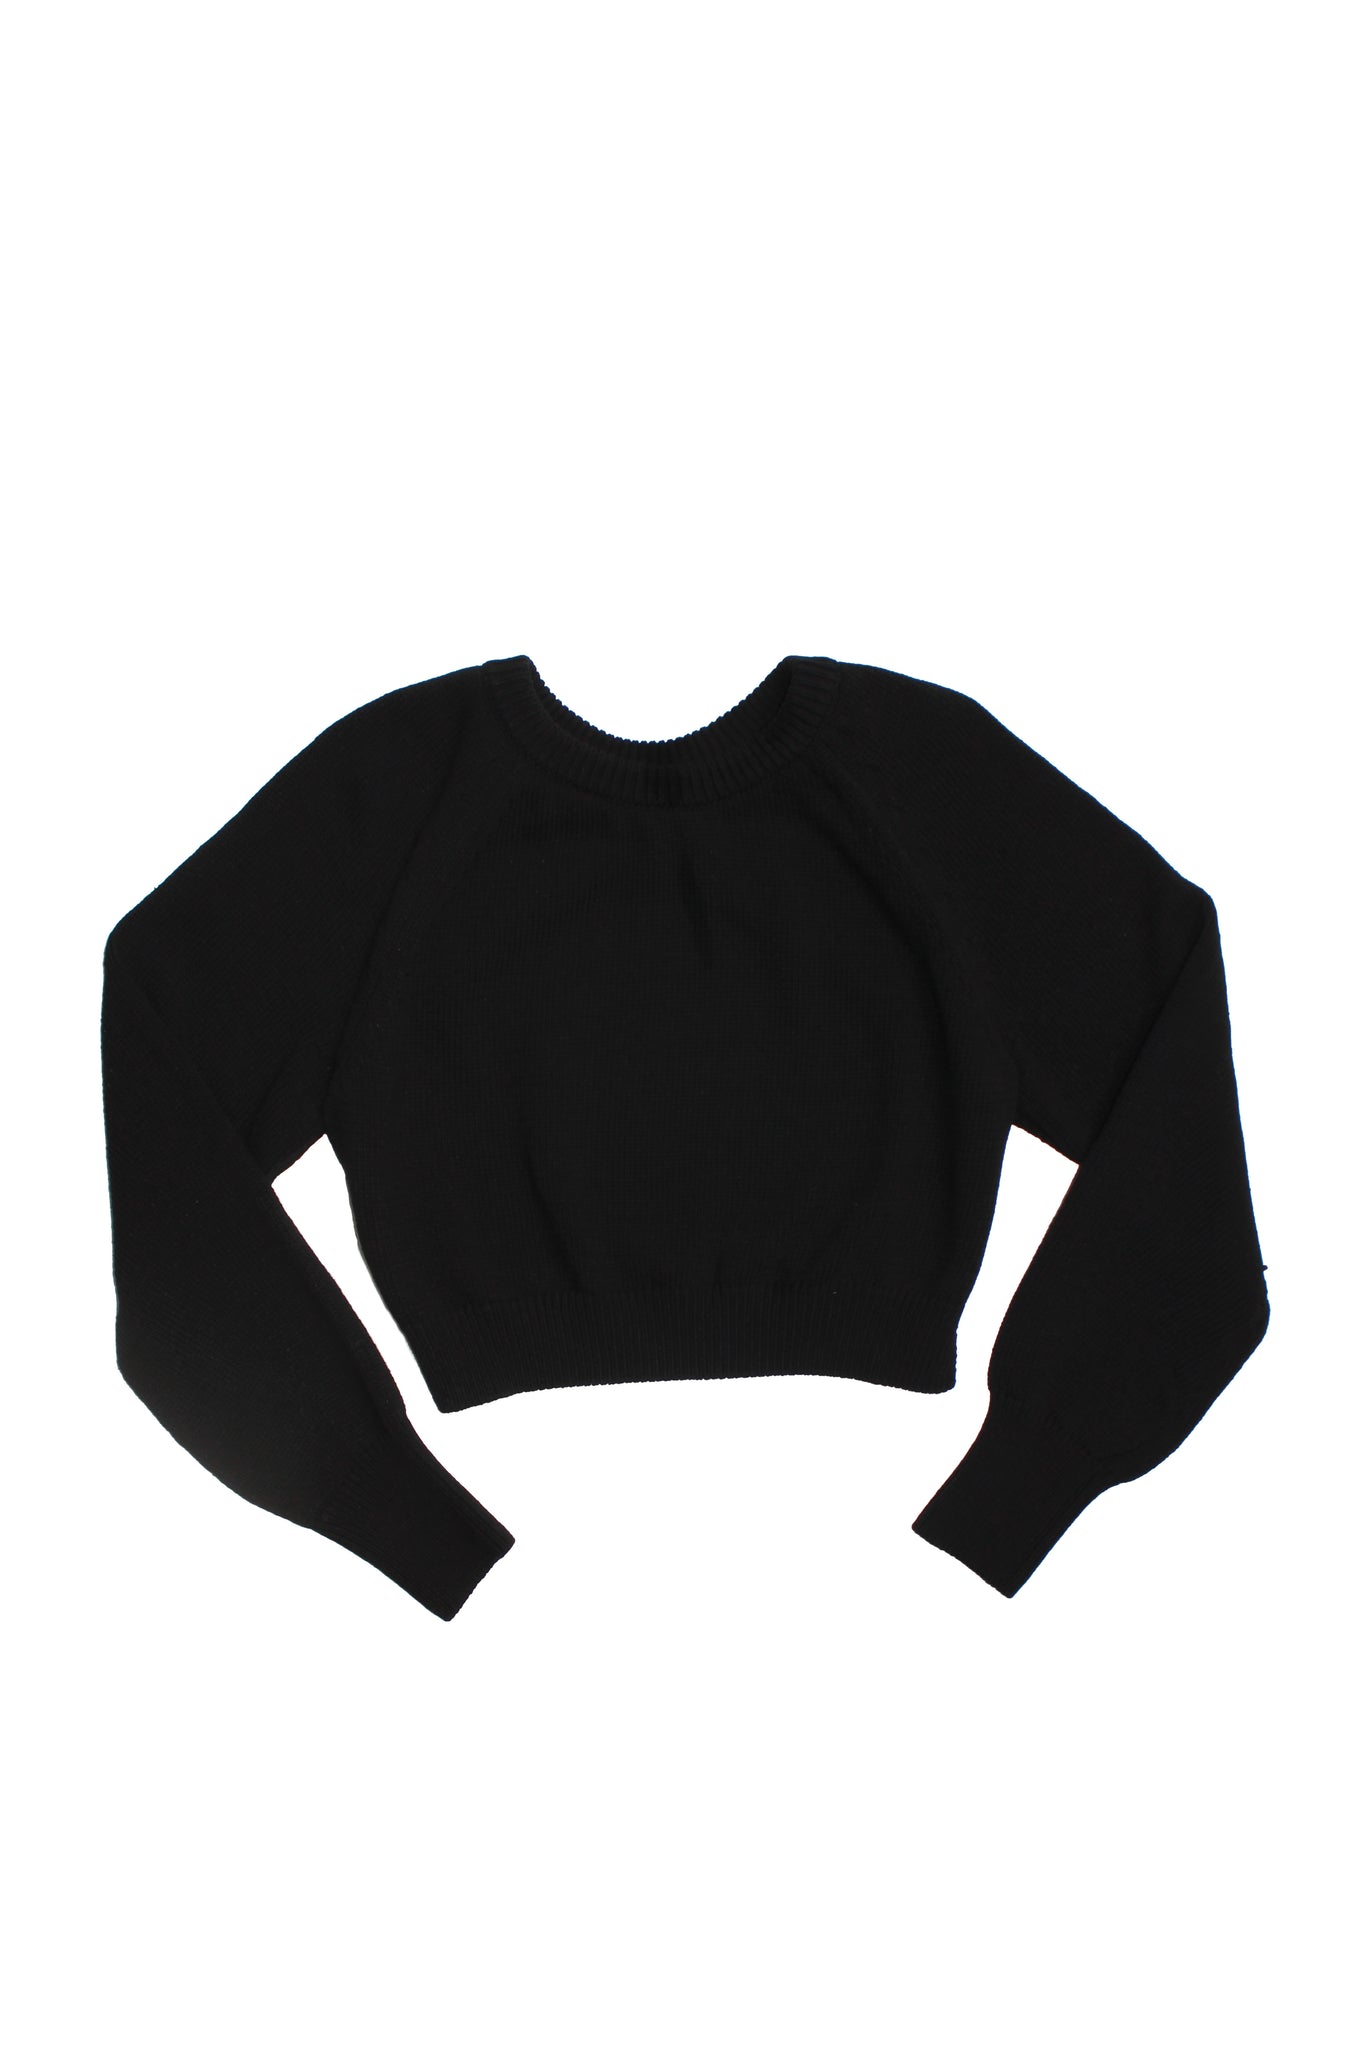 Two way knit top in Black